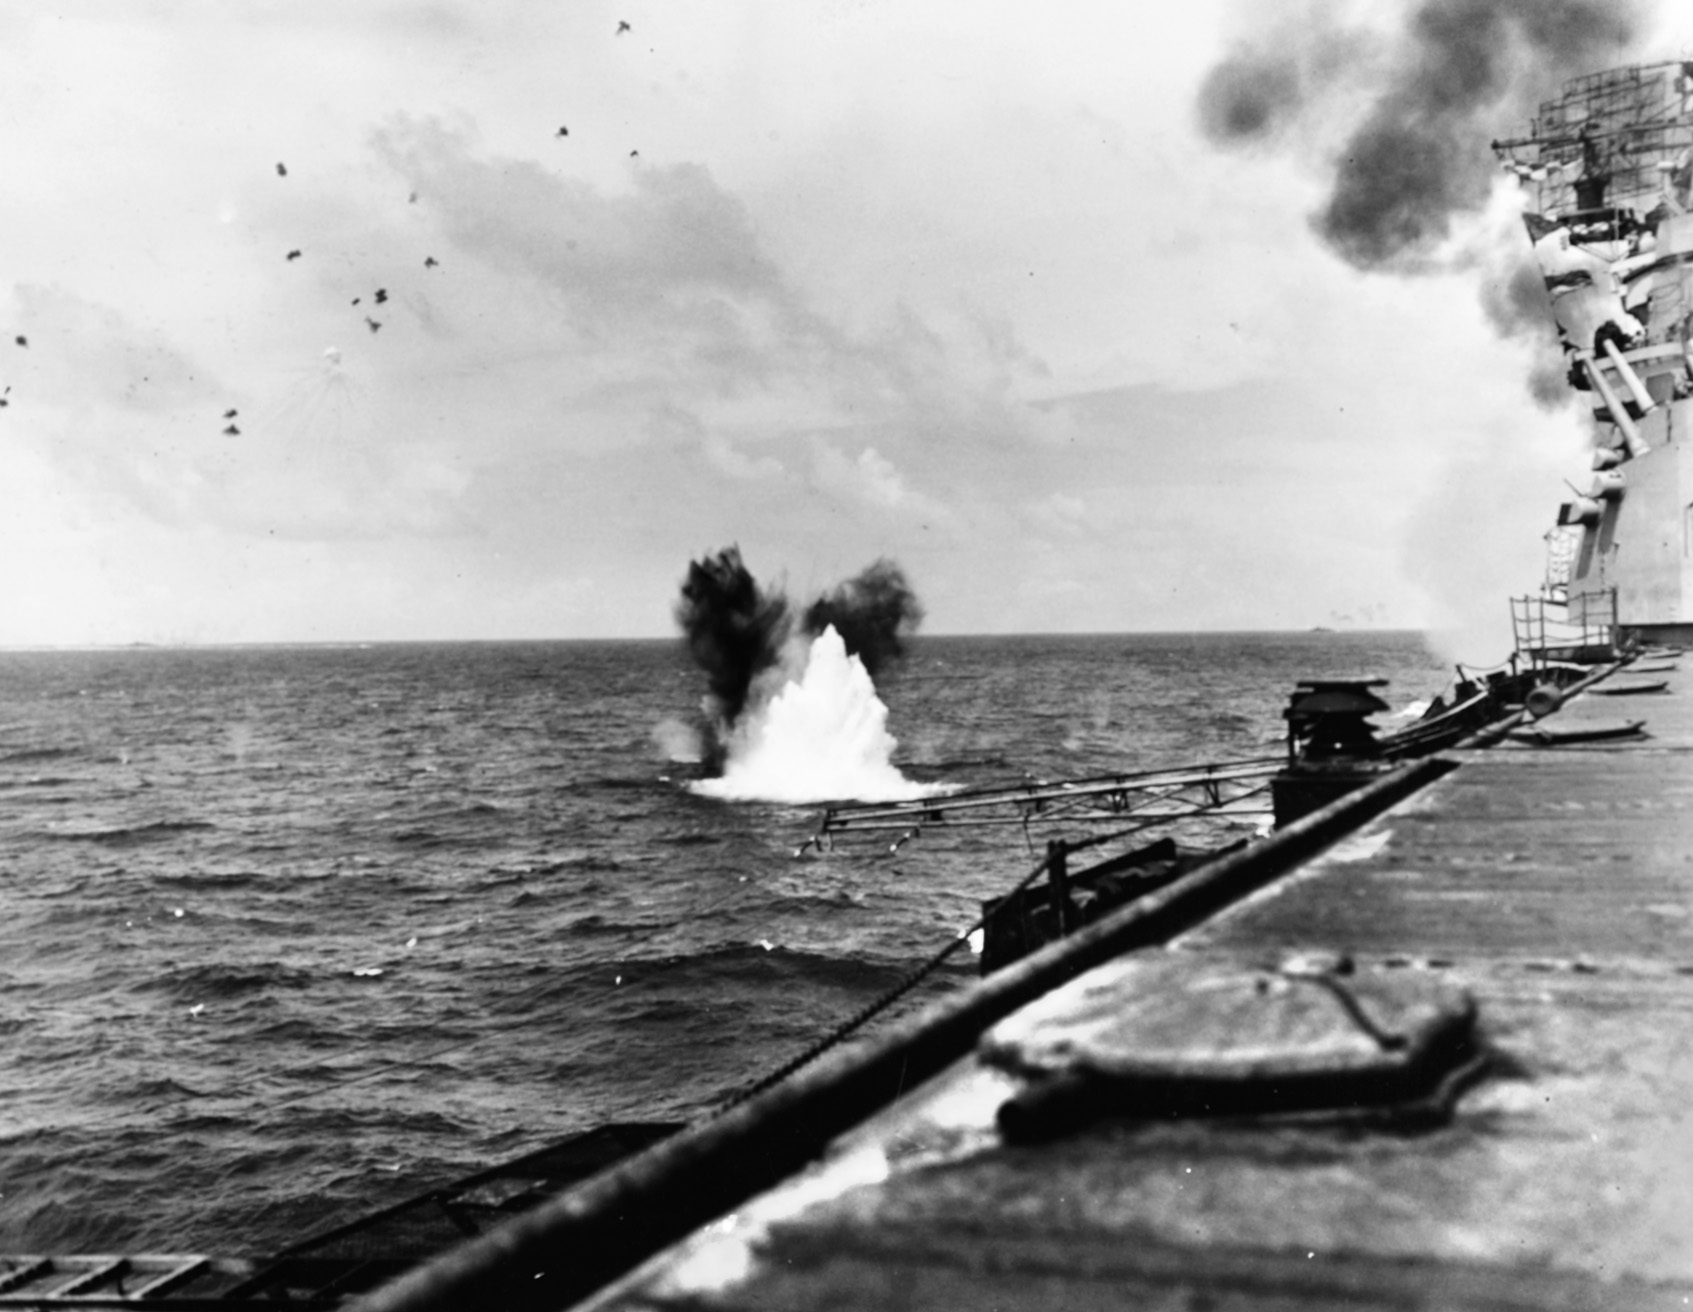 During early action in the battle, a Japanese bomb explodes close to the American aircraft carrier Bunker Hill.